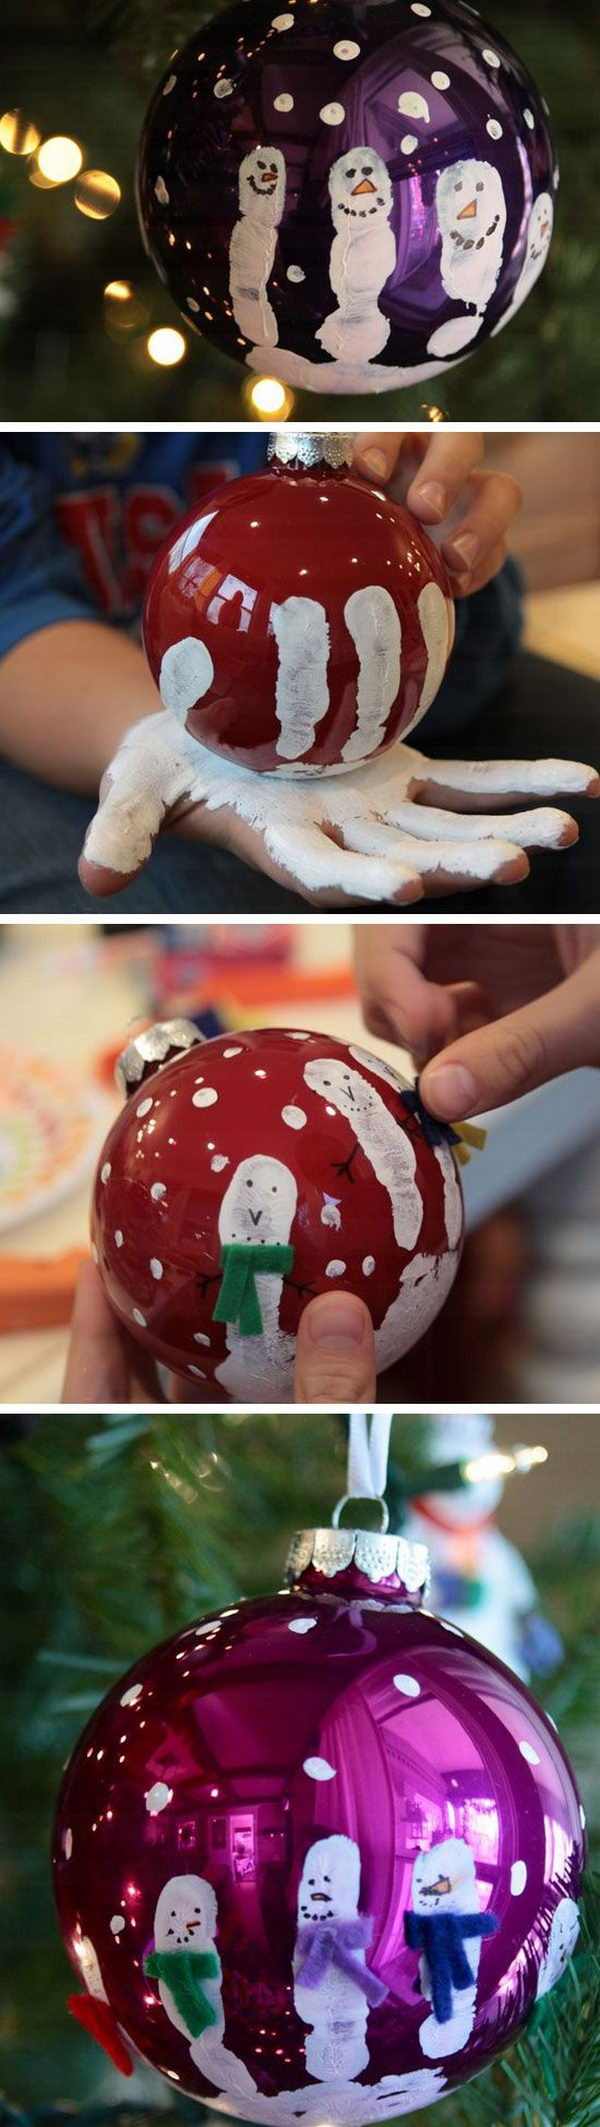 Children Christmas Craft Ideas
 Easy & Creative Christmas DIY Projects That Kids Can Do